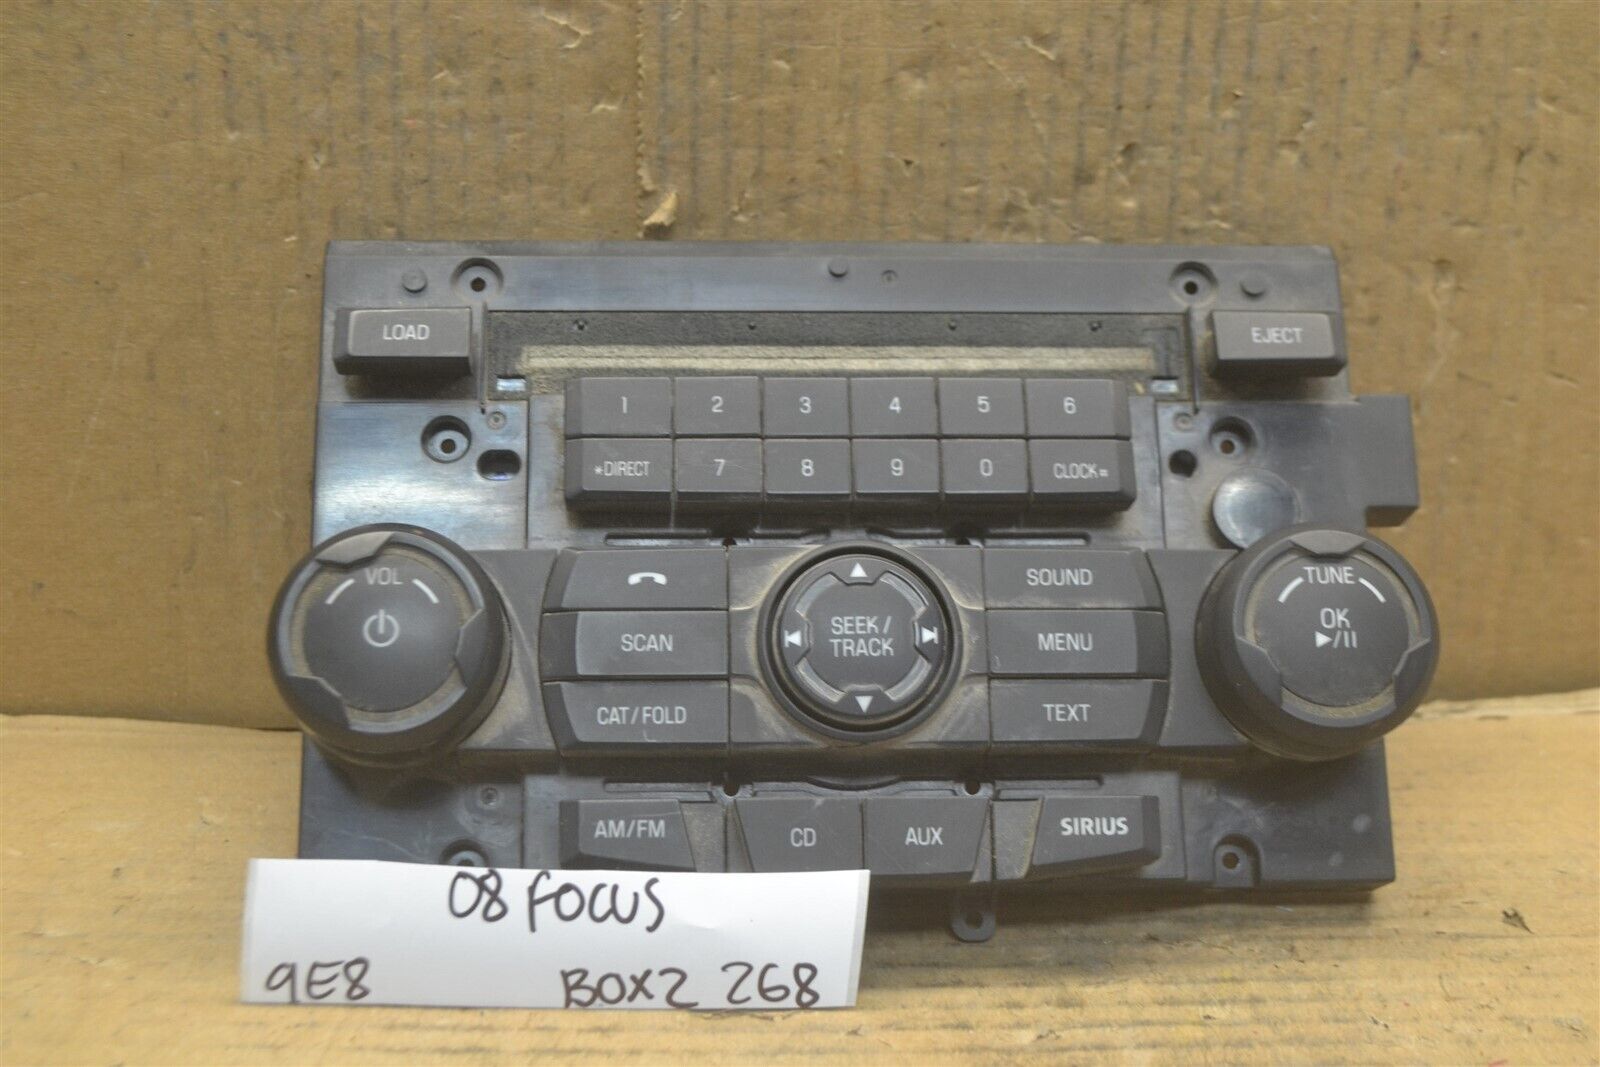 08 Ford Focus Radio CD Player MP3 Faceplate 8S4T18A802BHW Panel 268-9E8 Bx 2 - $13.99